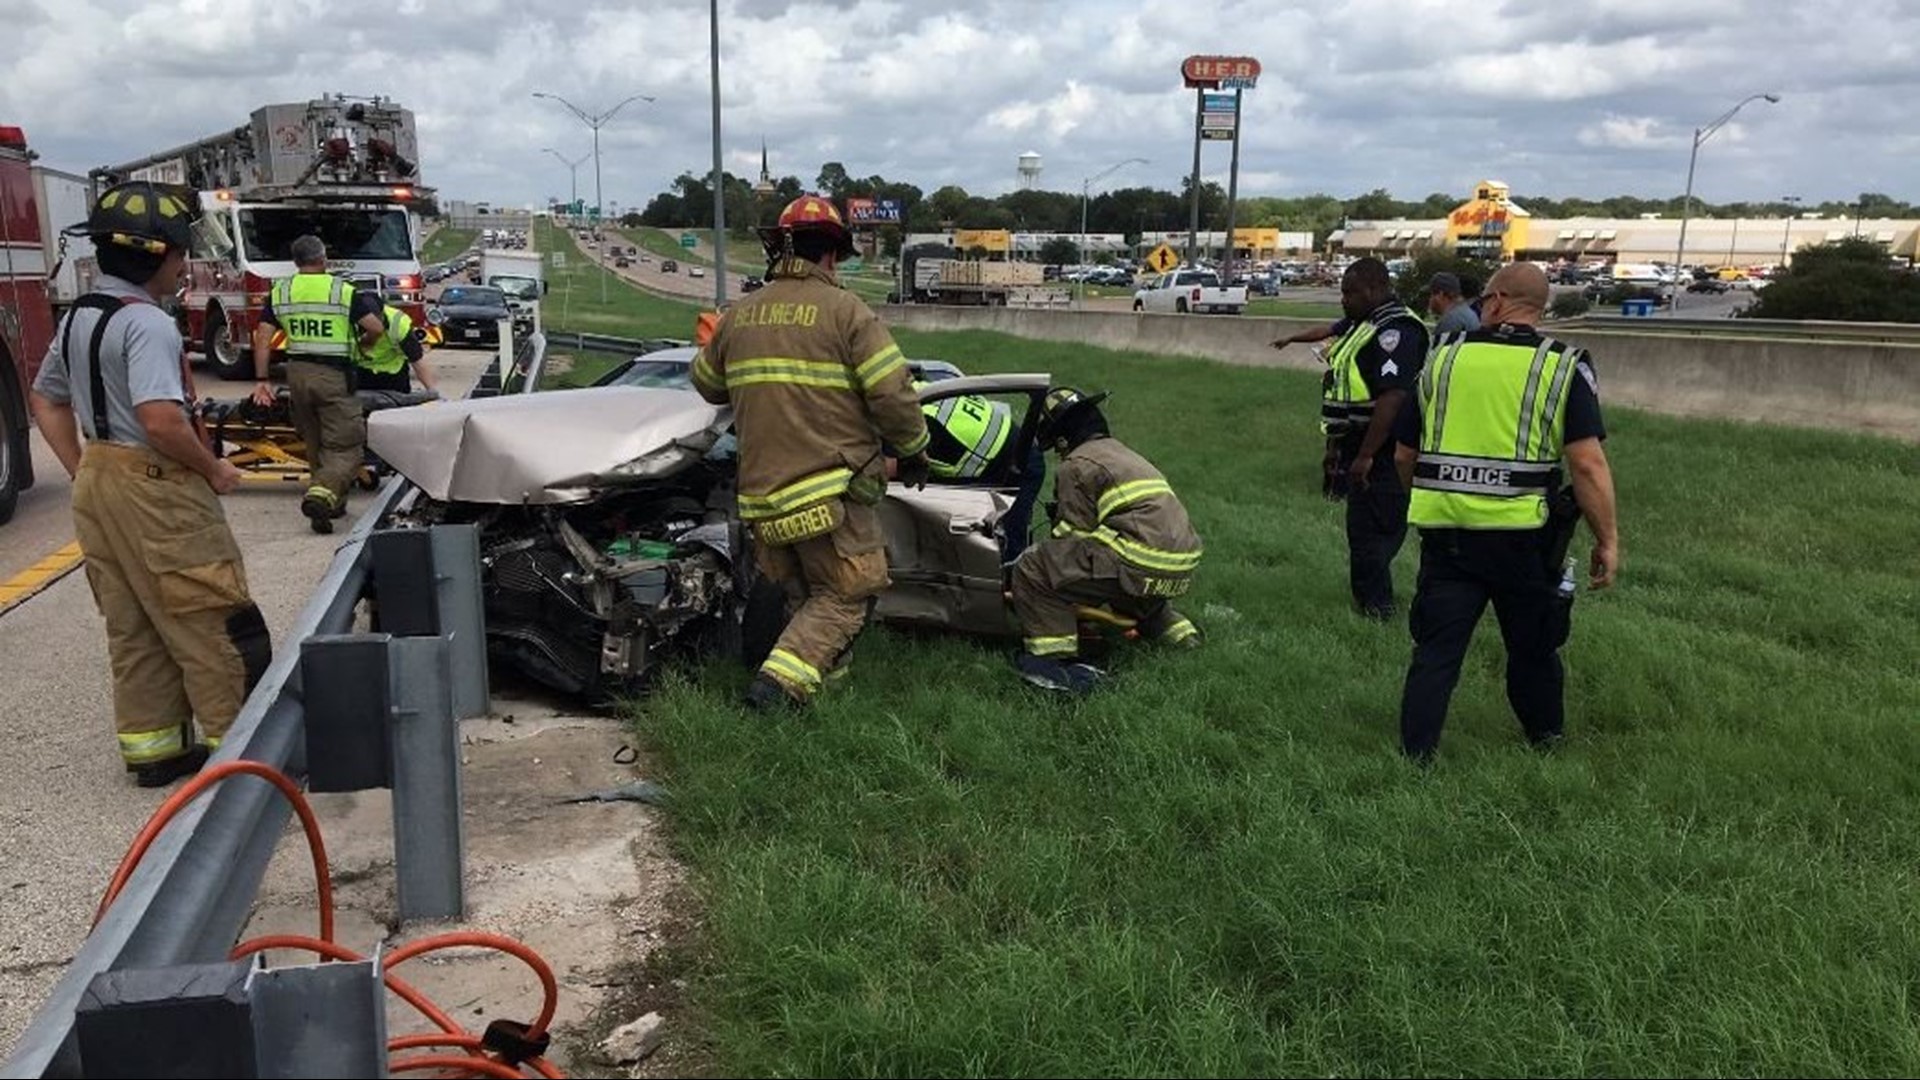 At least 1 person trapped after violent crash on I35 in Waco